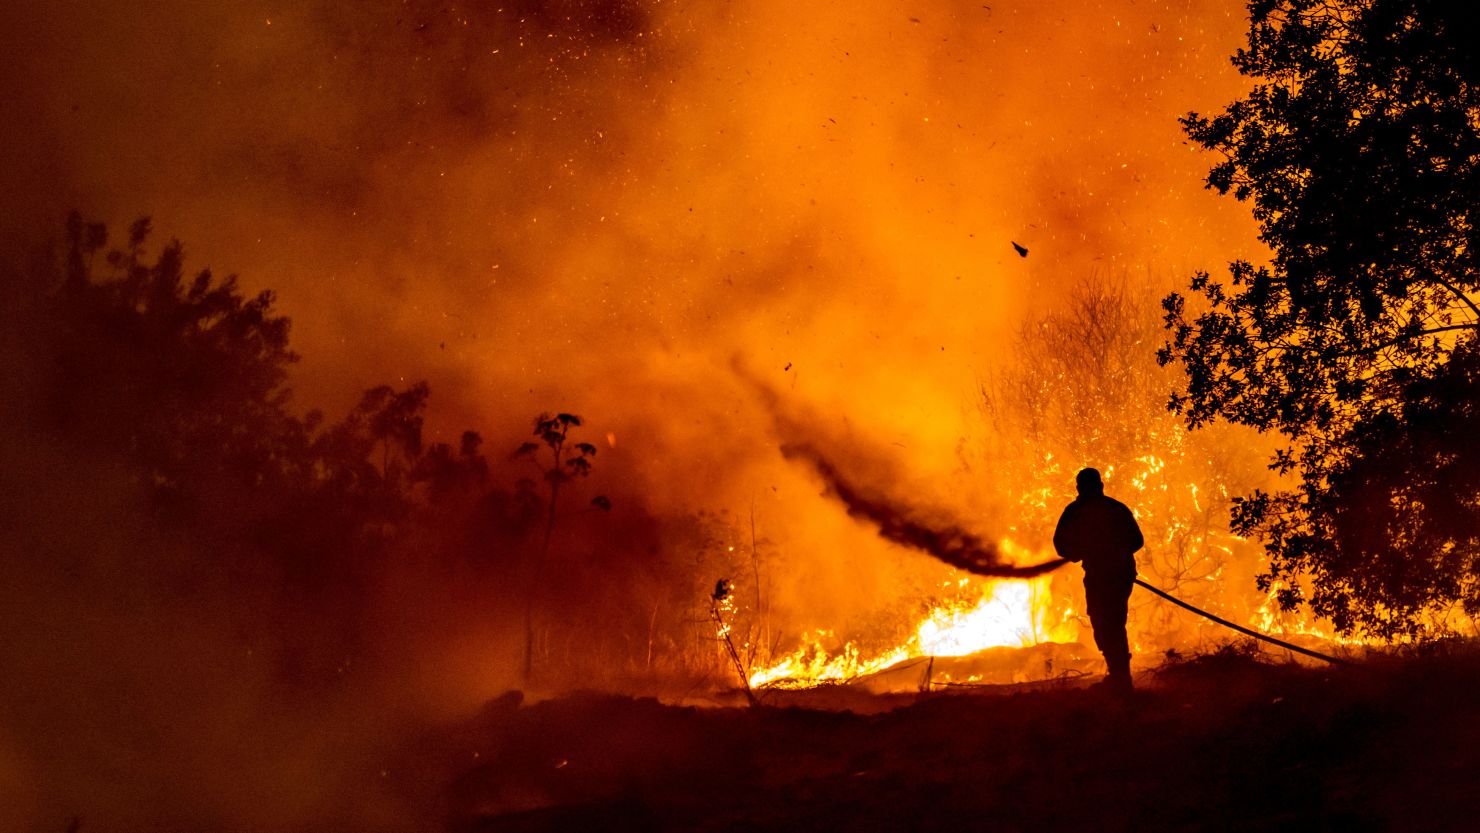 A firefighter battles the flame in a forest on the slopes of the Troodos mountain chain on July 3.